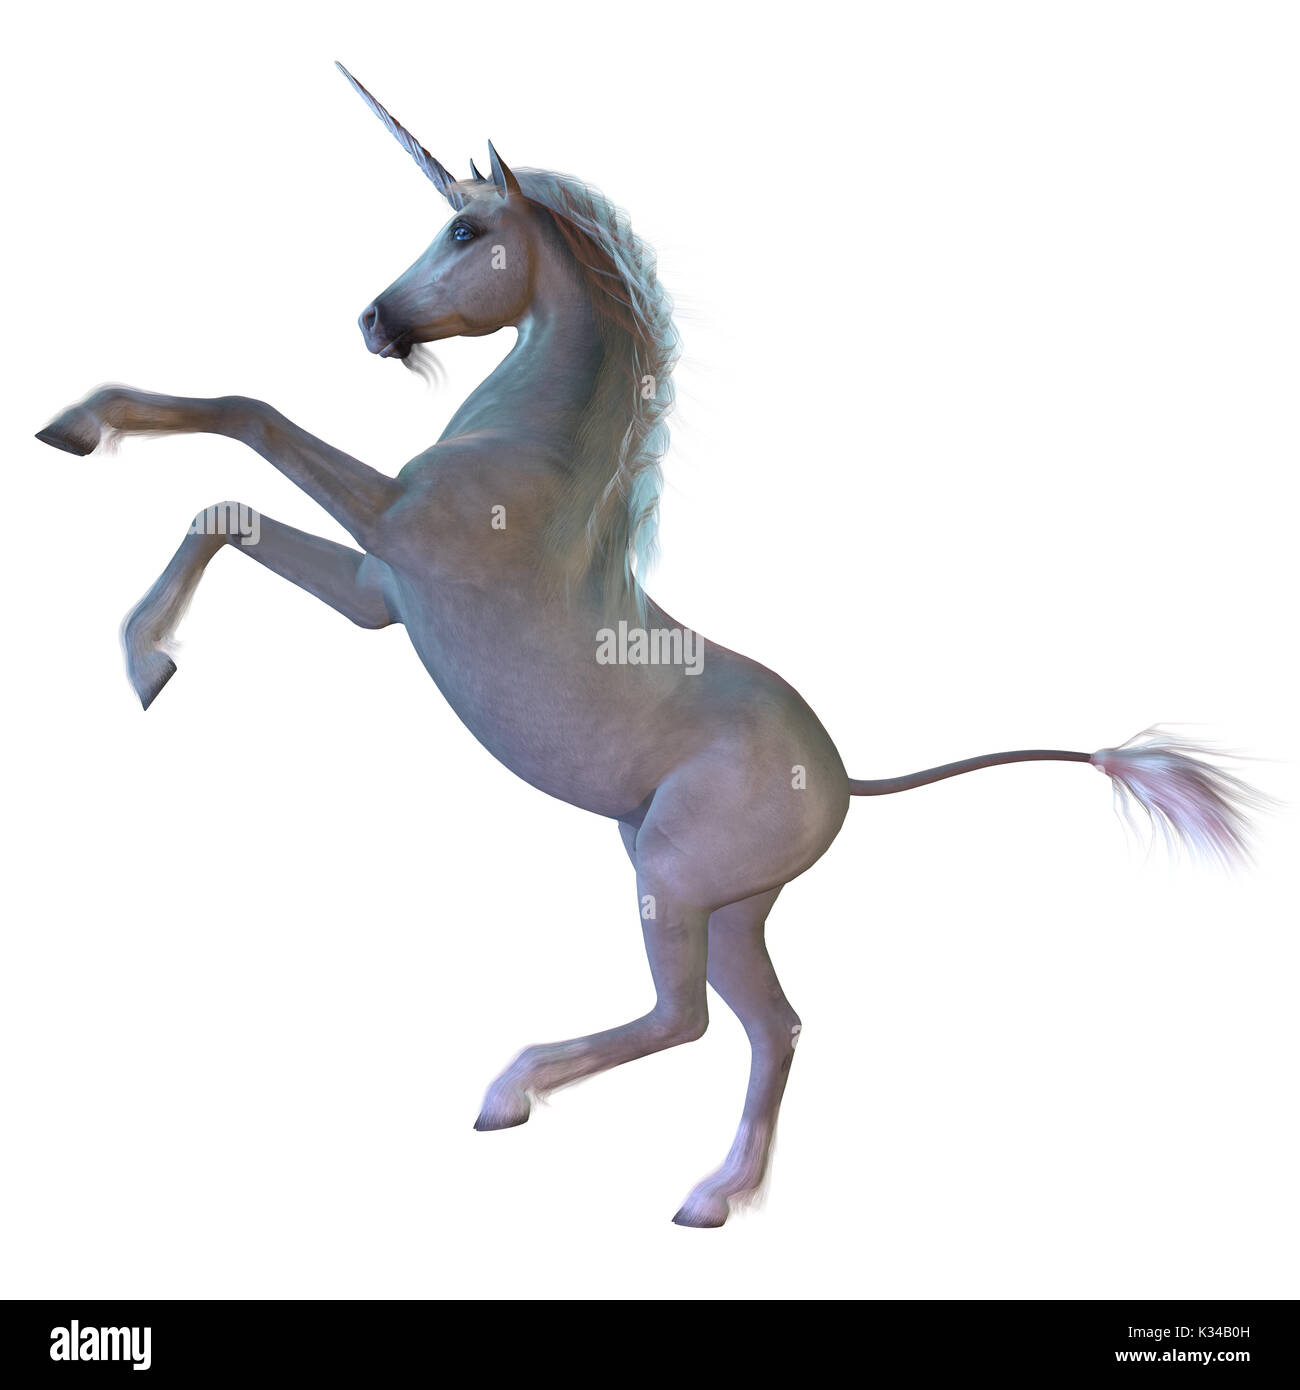 A Unicorn is a white magical horse with cloven hoofs, a forehead horn and a beard and is a creature of mythology. Stock Photo